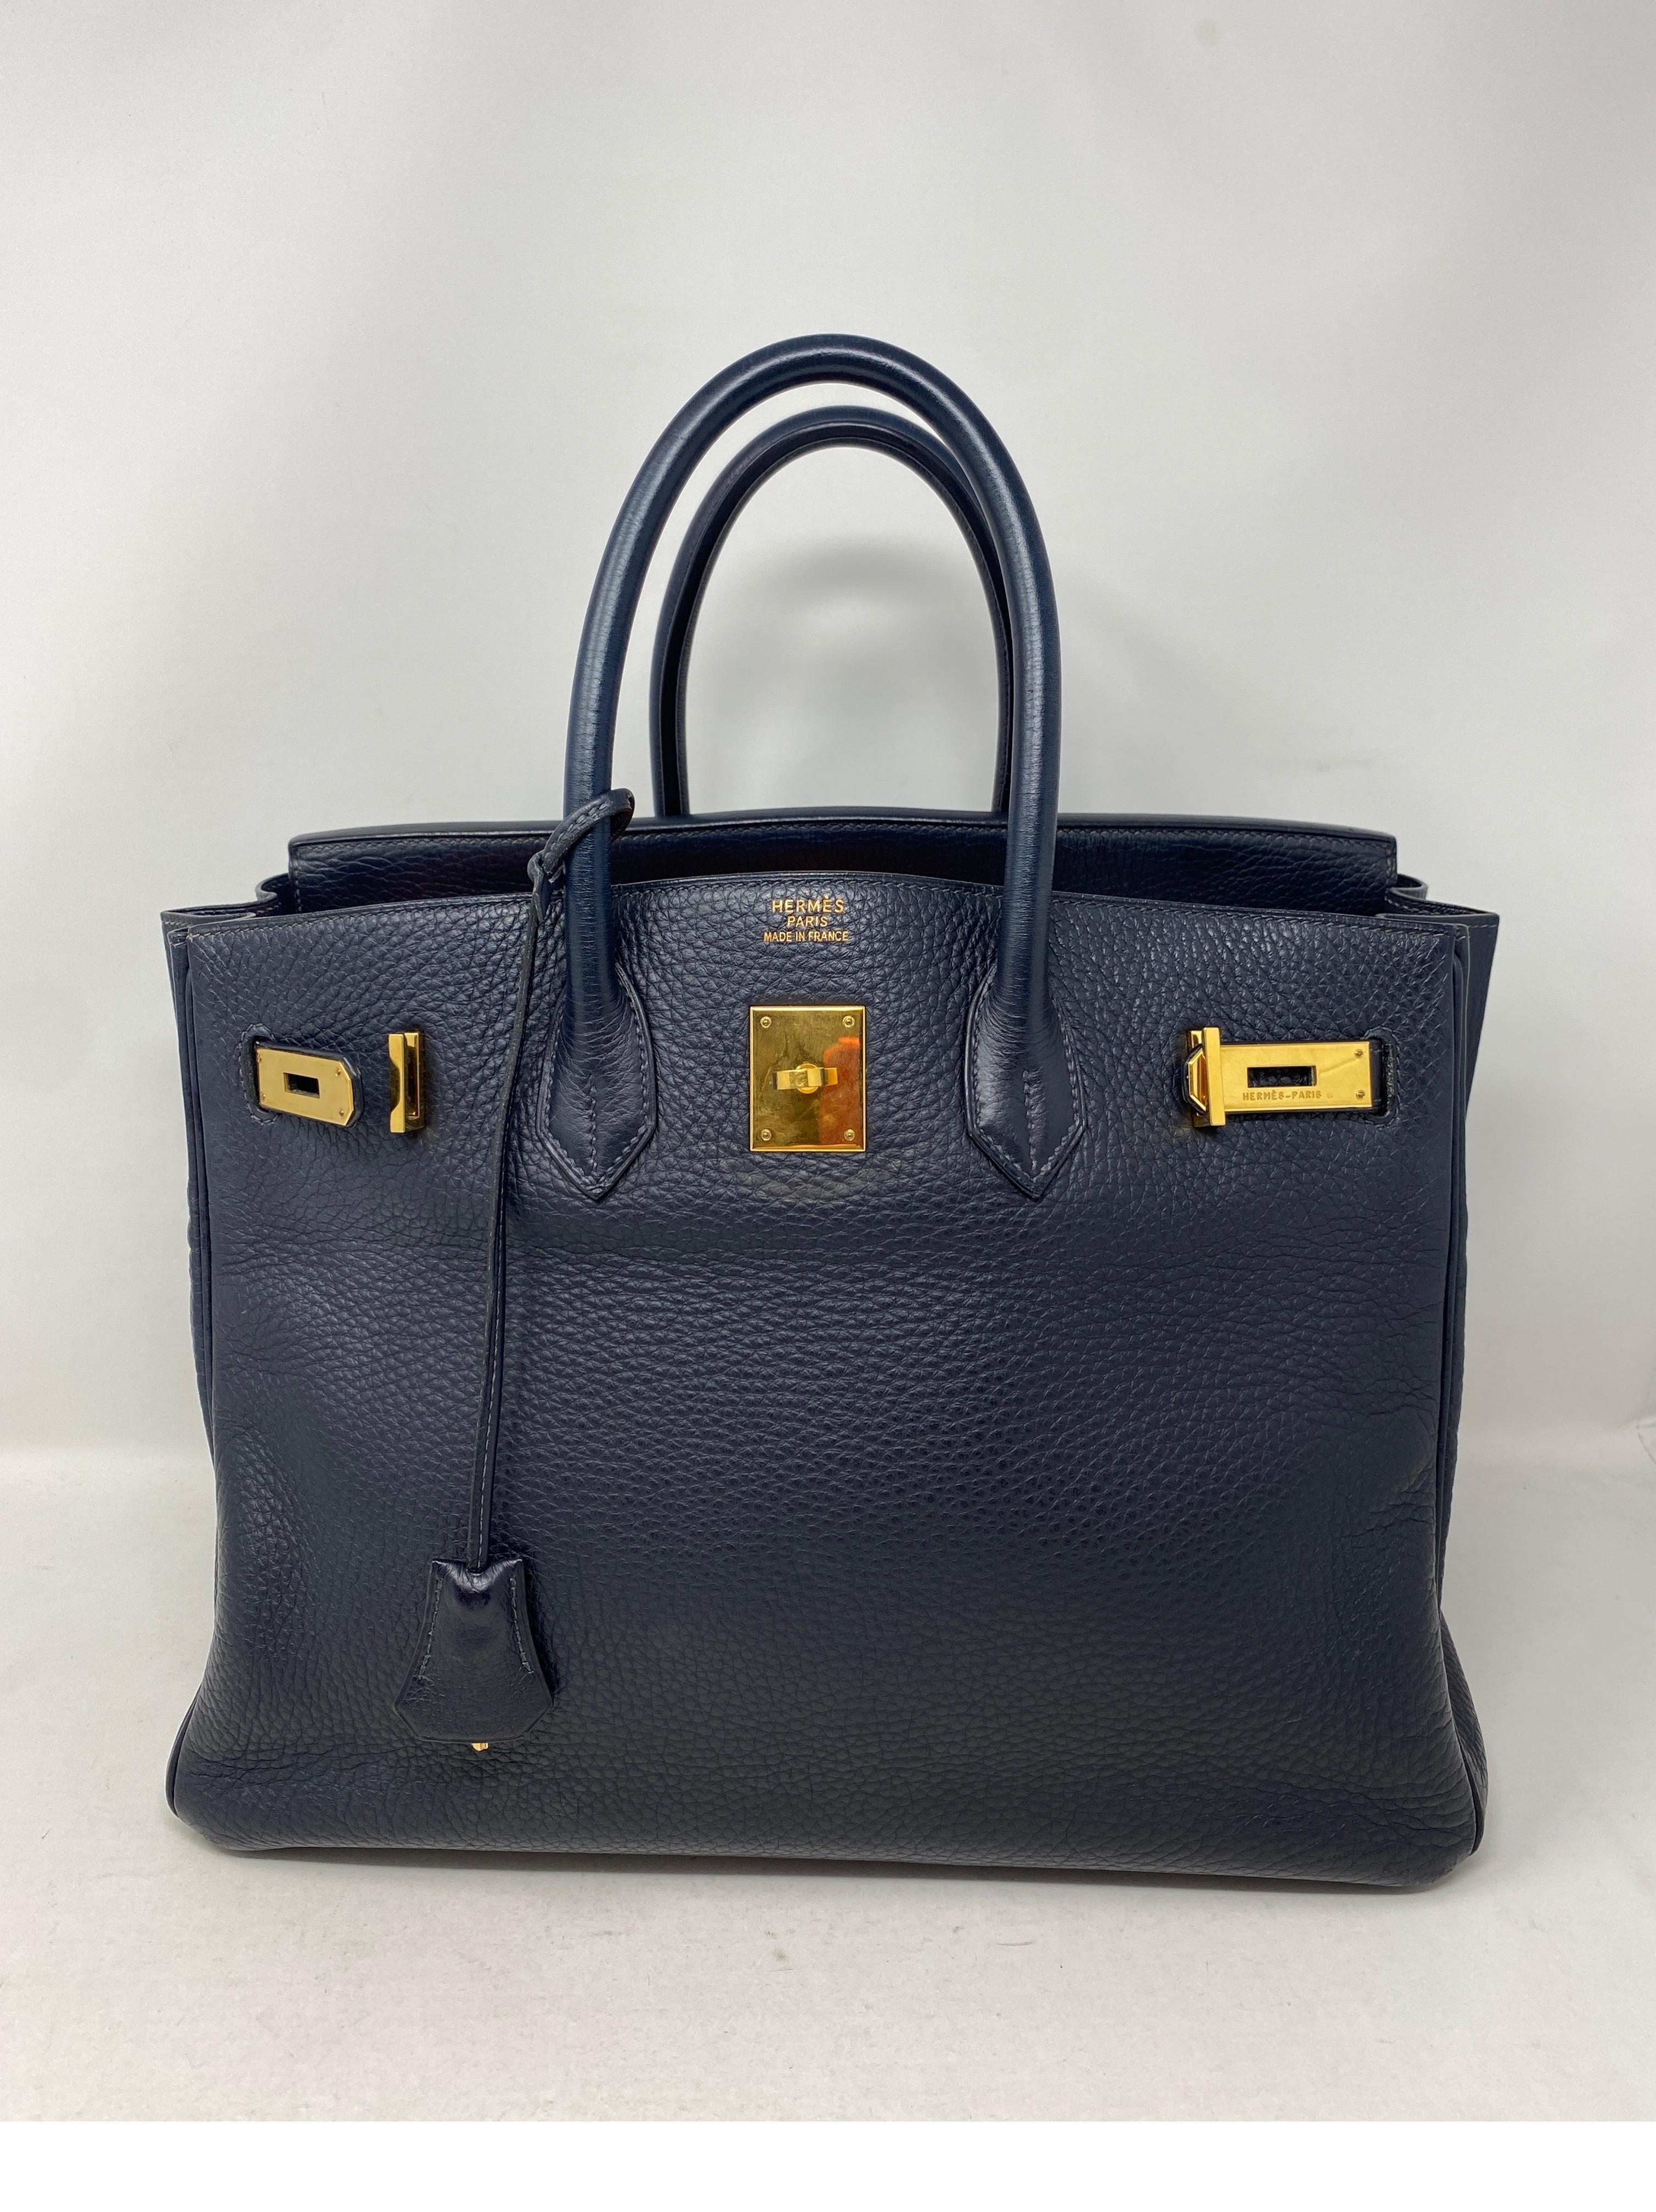 Hermes Birkin Bleu Nuit 35 Bag. Dark navy blue almost black color Birkin. Clemence leather. Gold hardware. Good condition. Slight crease on middle of bag due to storage. Will even out with wear. G square stamp. Beautiful bag. Hard to find color and